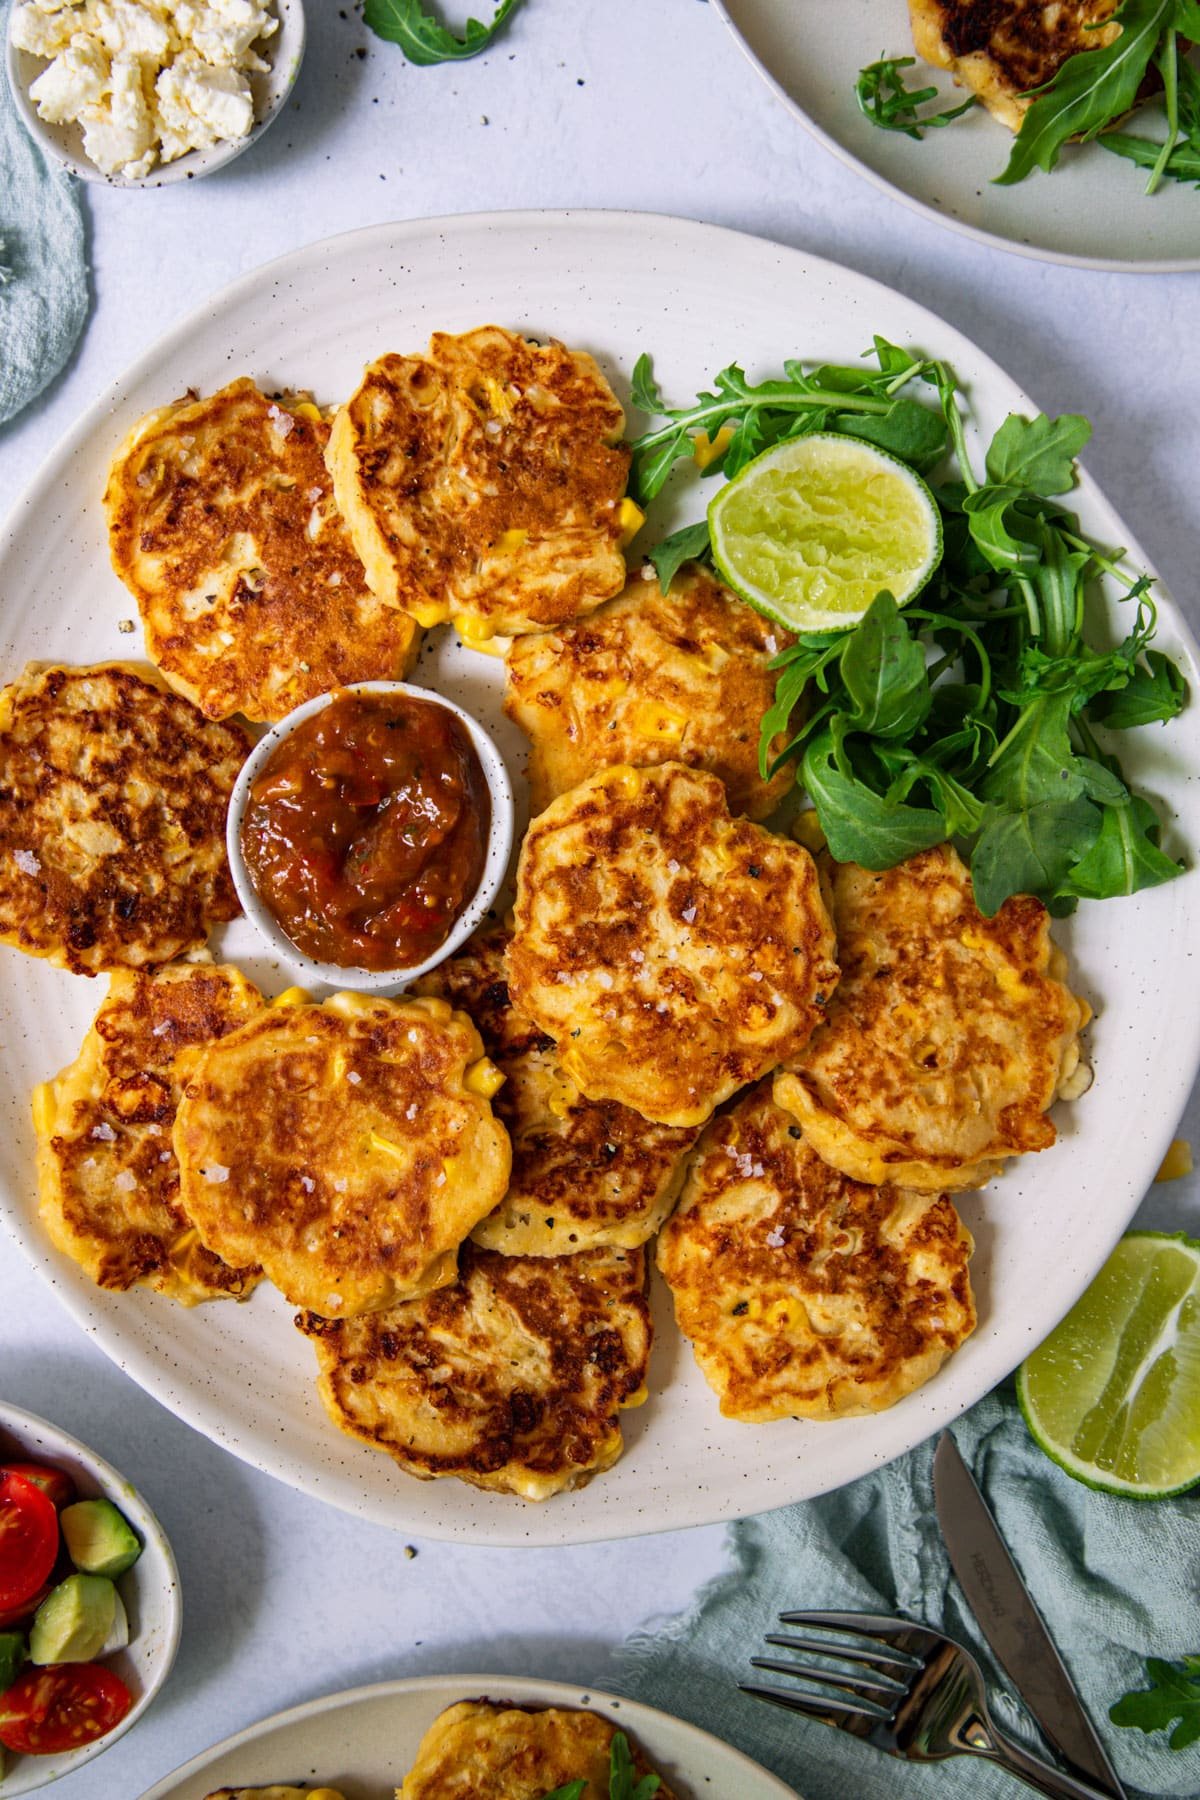 a plate of corn fritters with salad and sauce.